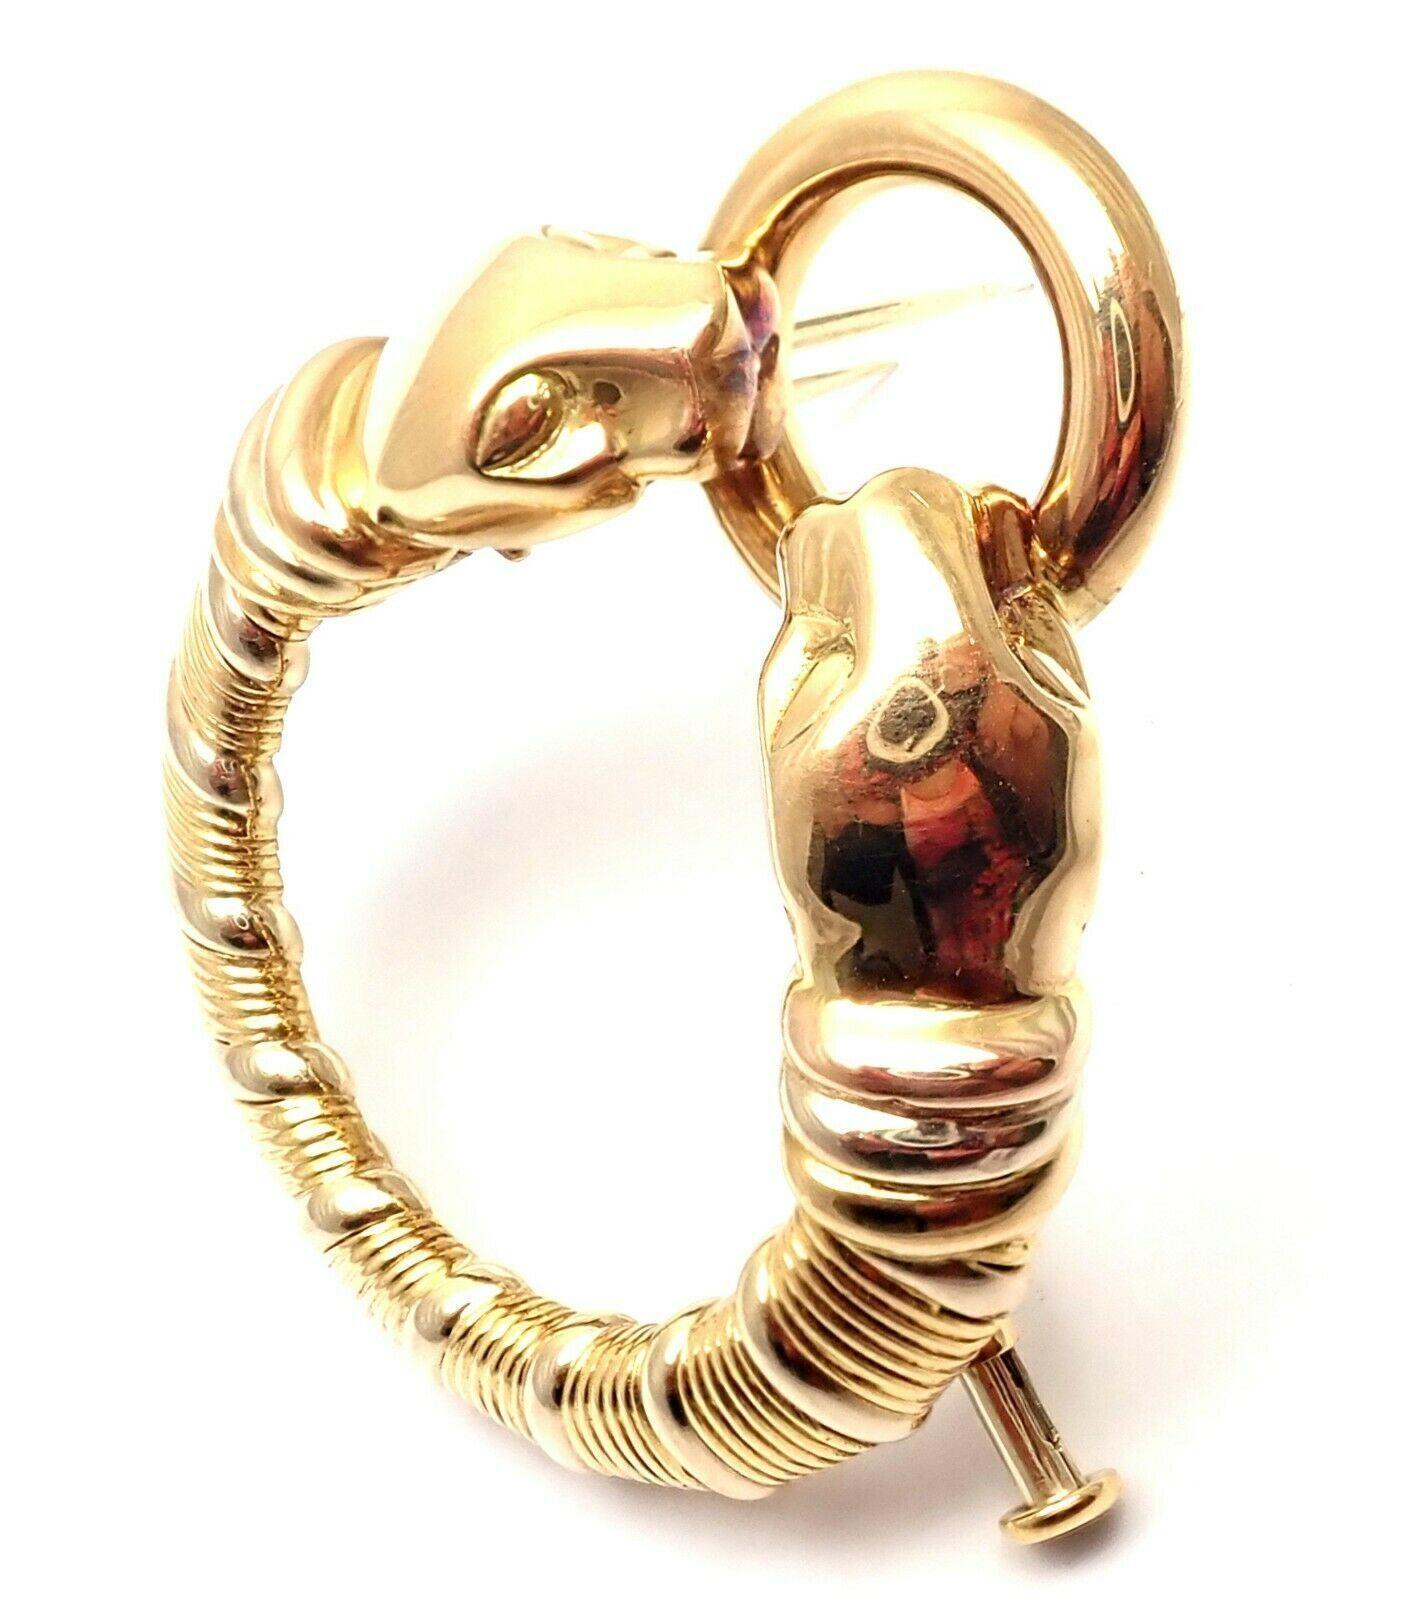 18k Tri-Color (Yellow, White, Rose) Gold   Panther Pin Brooch by Cartier. Part of Cartier's infamous 